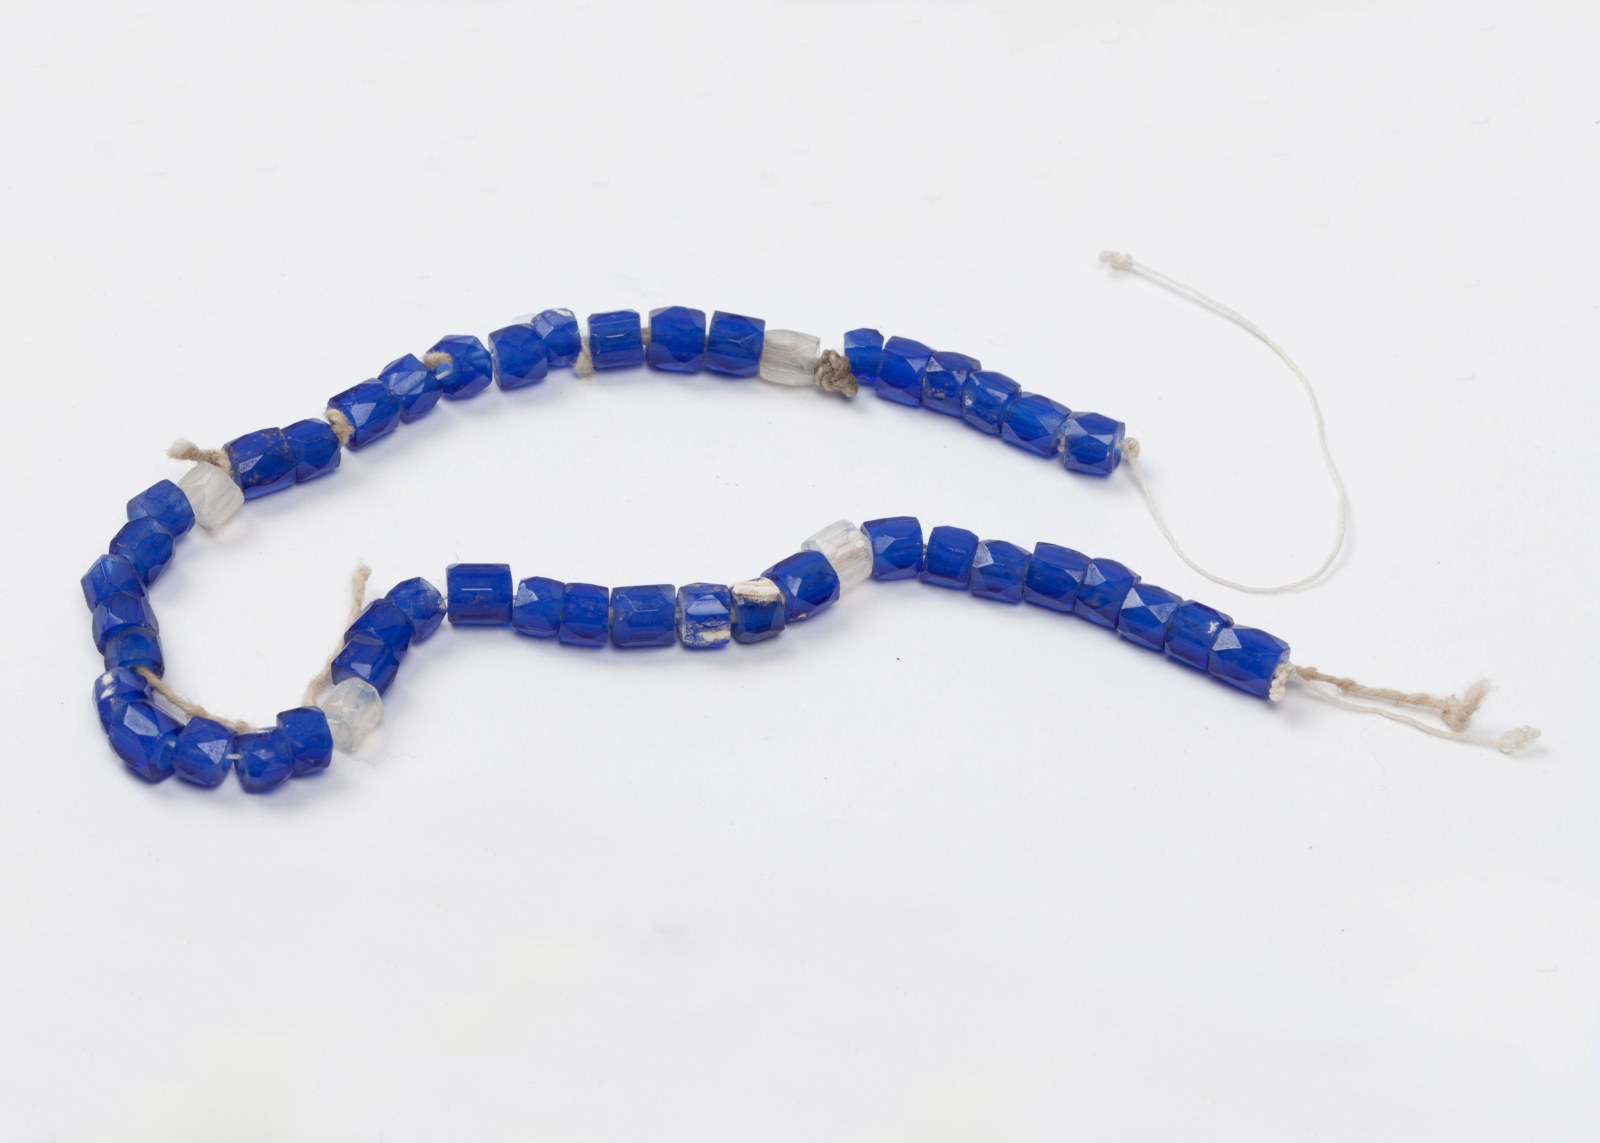 String of blue glass rosary beads, featuring mainly blue beads with the occasional white bead, connected with white string.